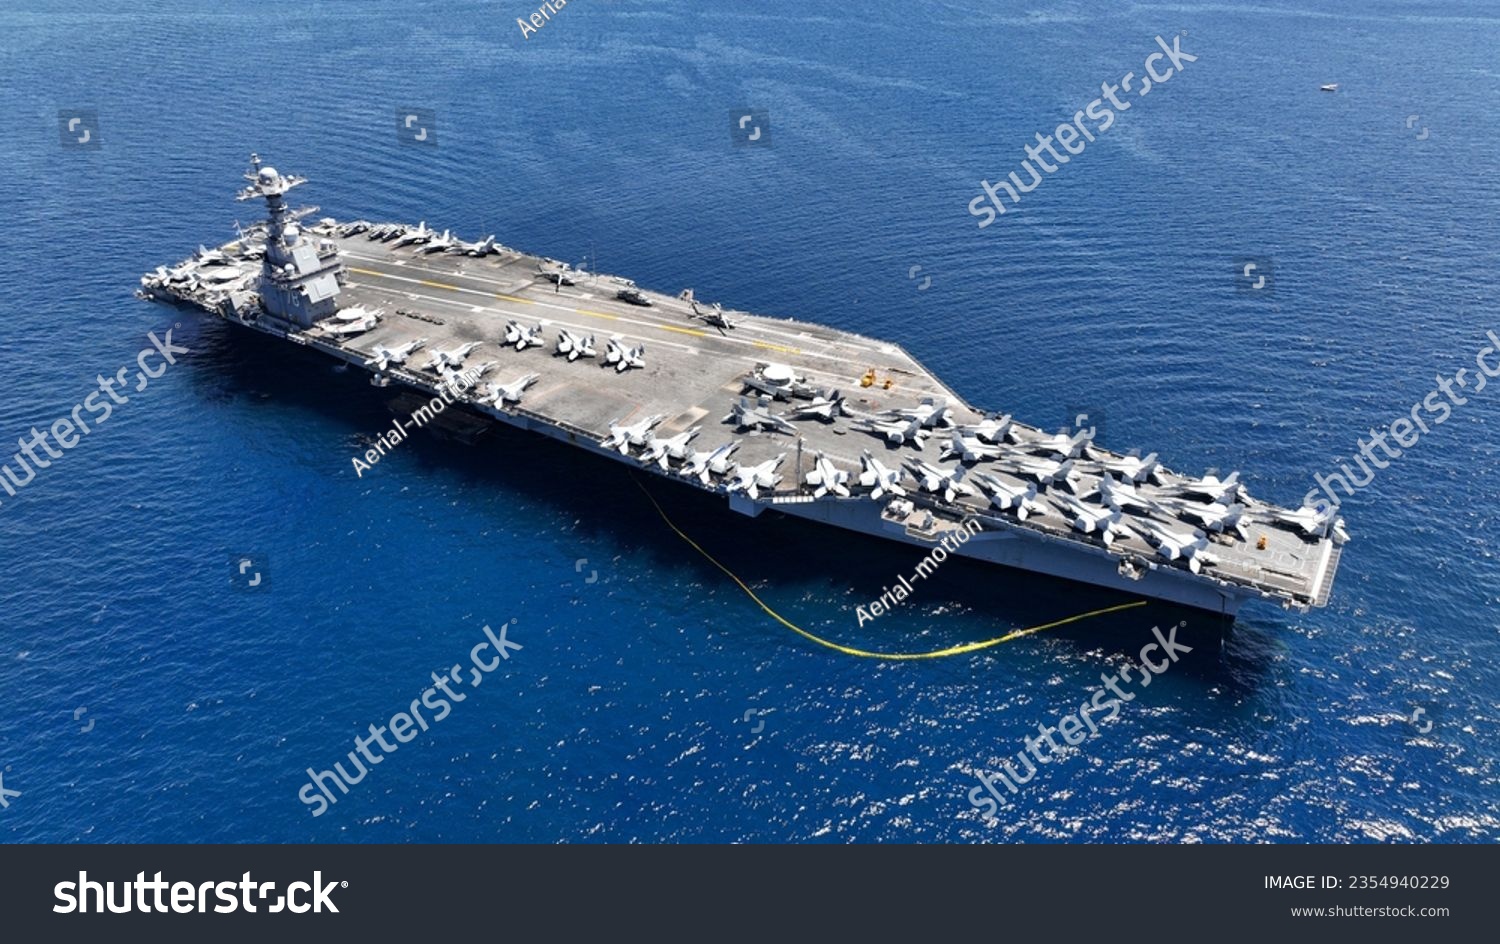 Aerial drone photo of USS Gerald R. Ford latest technology nuclear powered aircraft carrier anchored in deep blue open ocean sea #2354940229